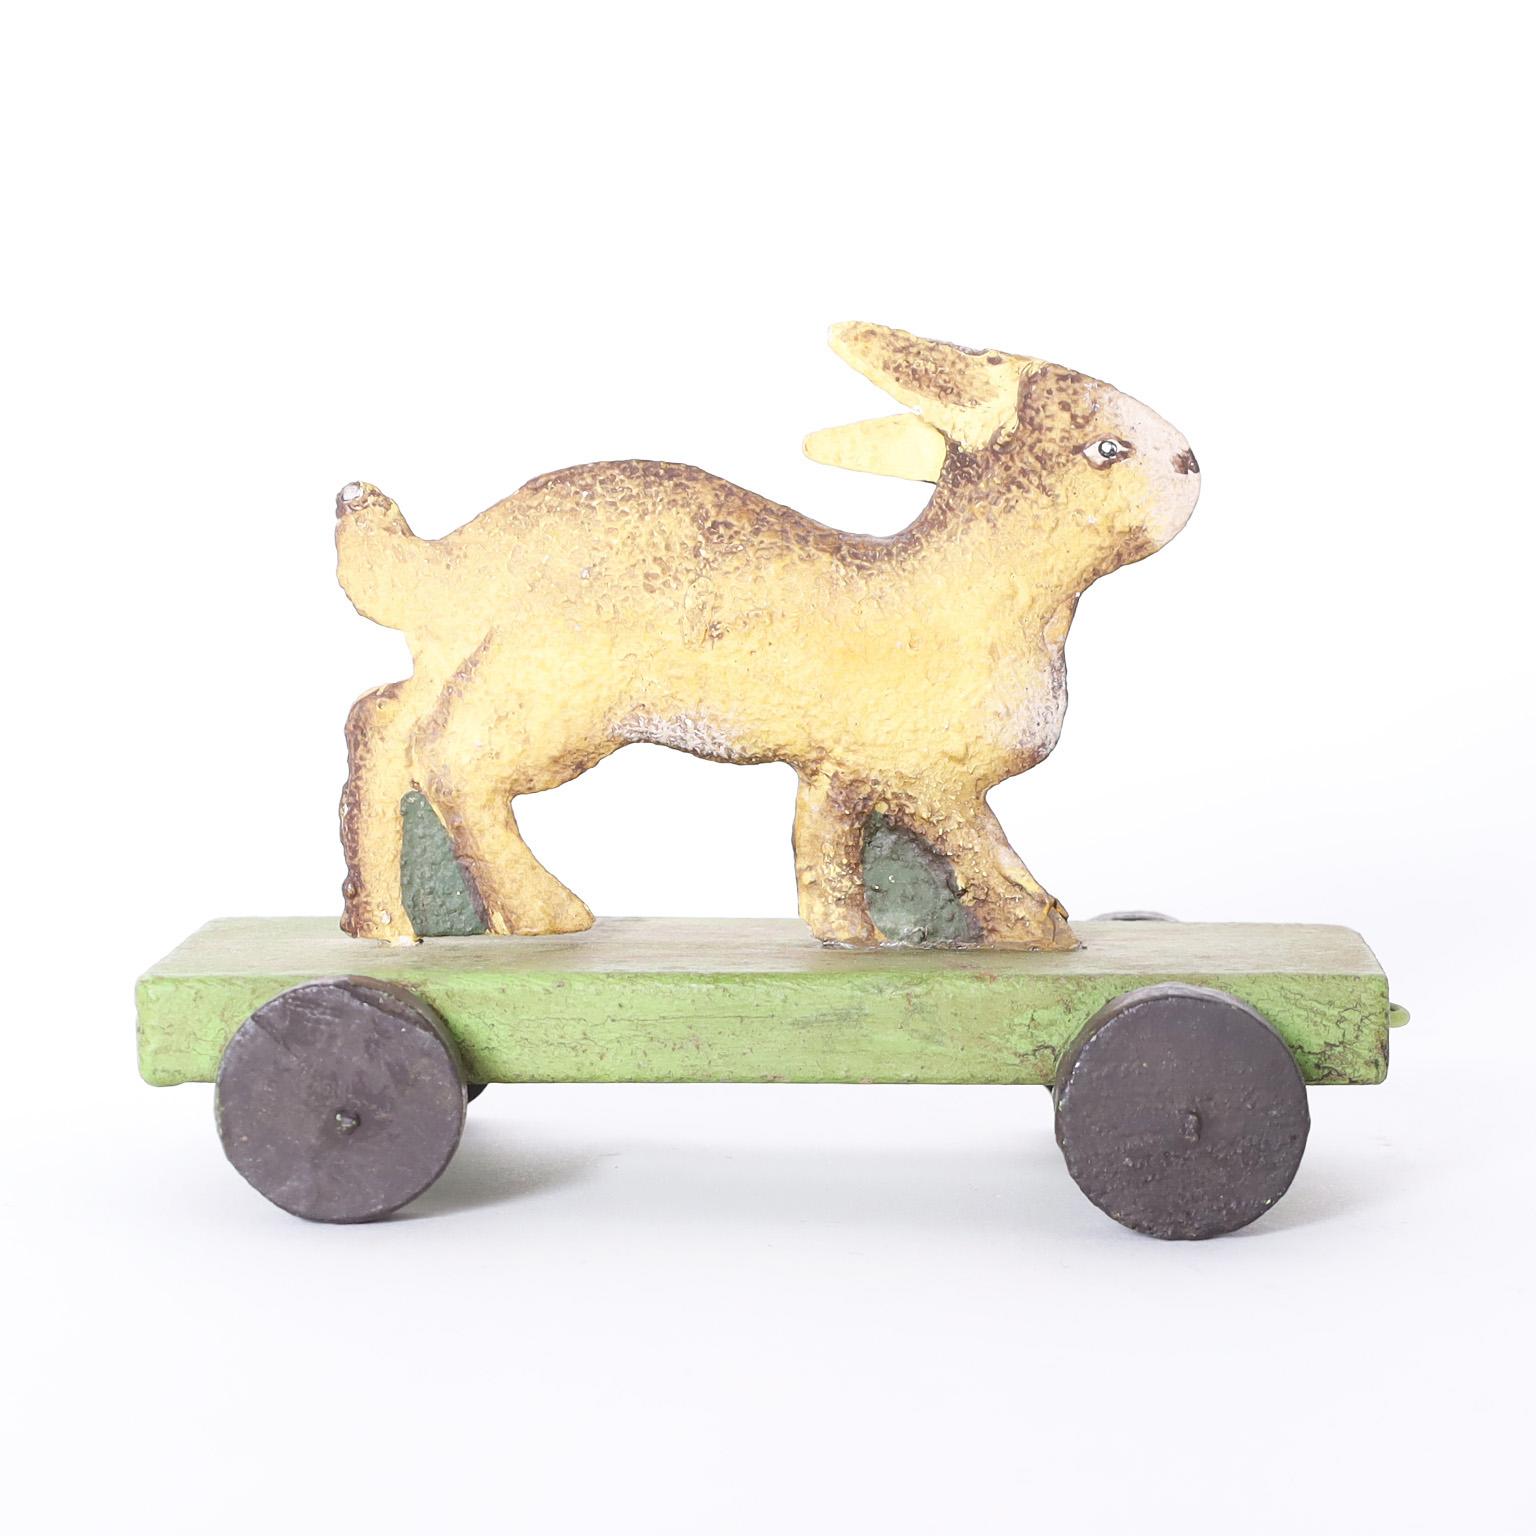 Vintage three piece child's circus train toys featuring a lion, a monkey riding a dog, and a rabbit crafted in metal and hand painted, riding on wooden cars in a simple time and place. Can be available individually, please inquire for more details.